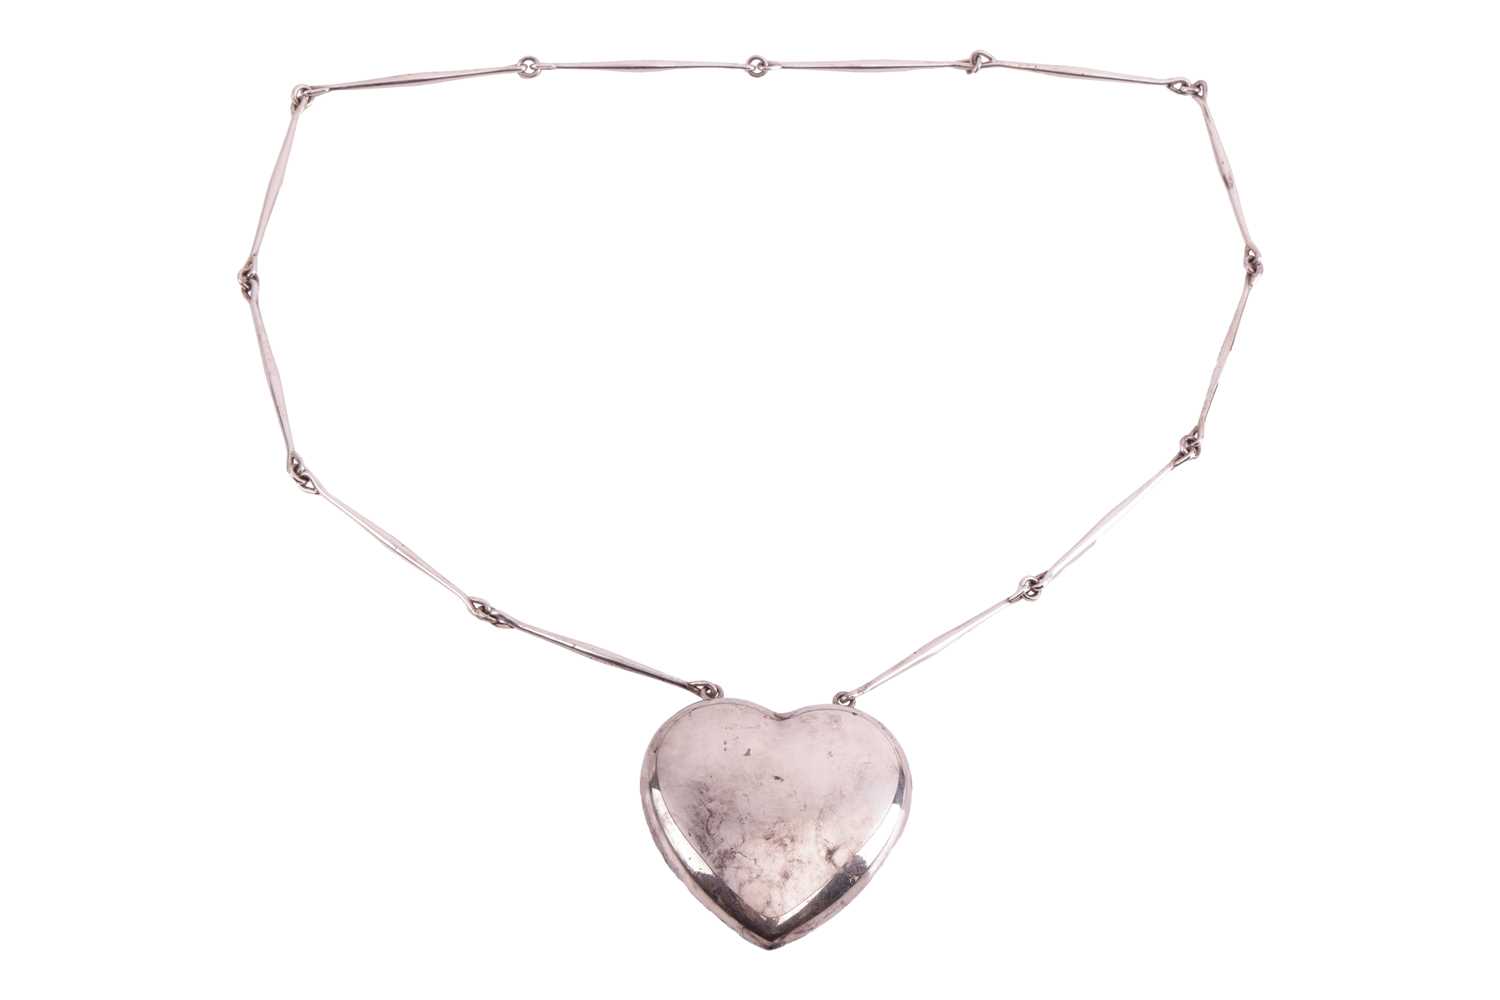 Georg Jensen - a large 'Joy' heart necklace, with a hollow heart-shaped pendant, attached to a serie